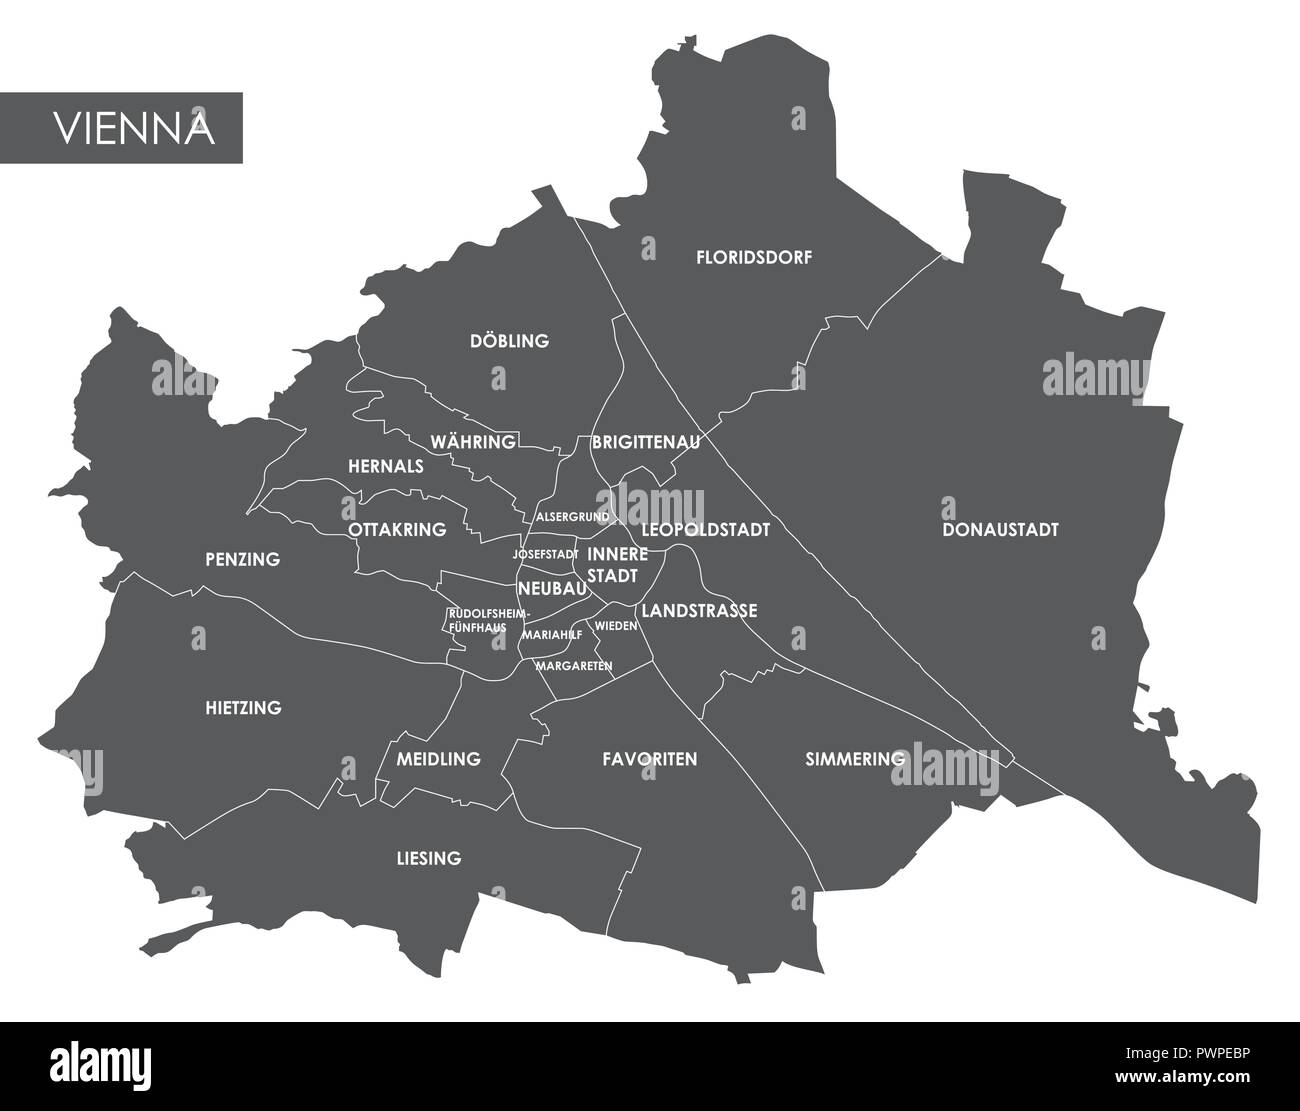 Vector map Vienna district detailed plan of the city, districts and neighborhoods Stock Vector